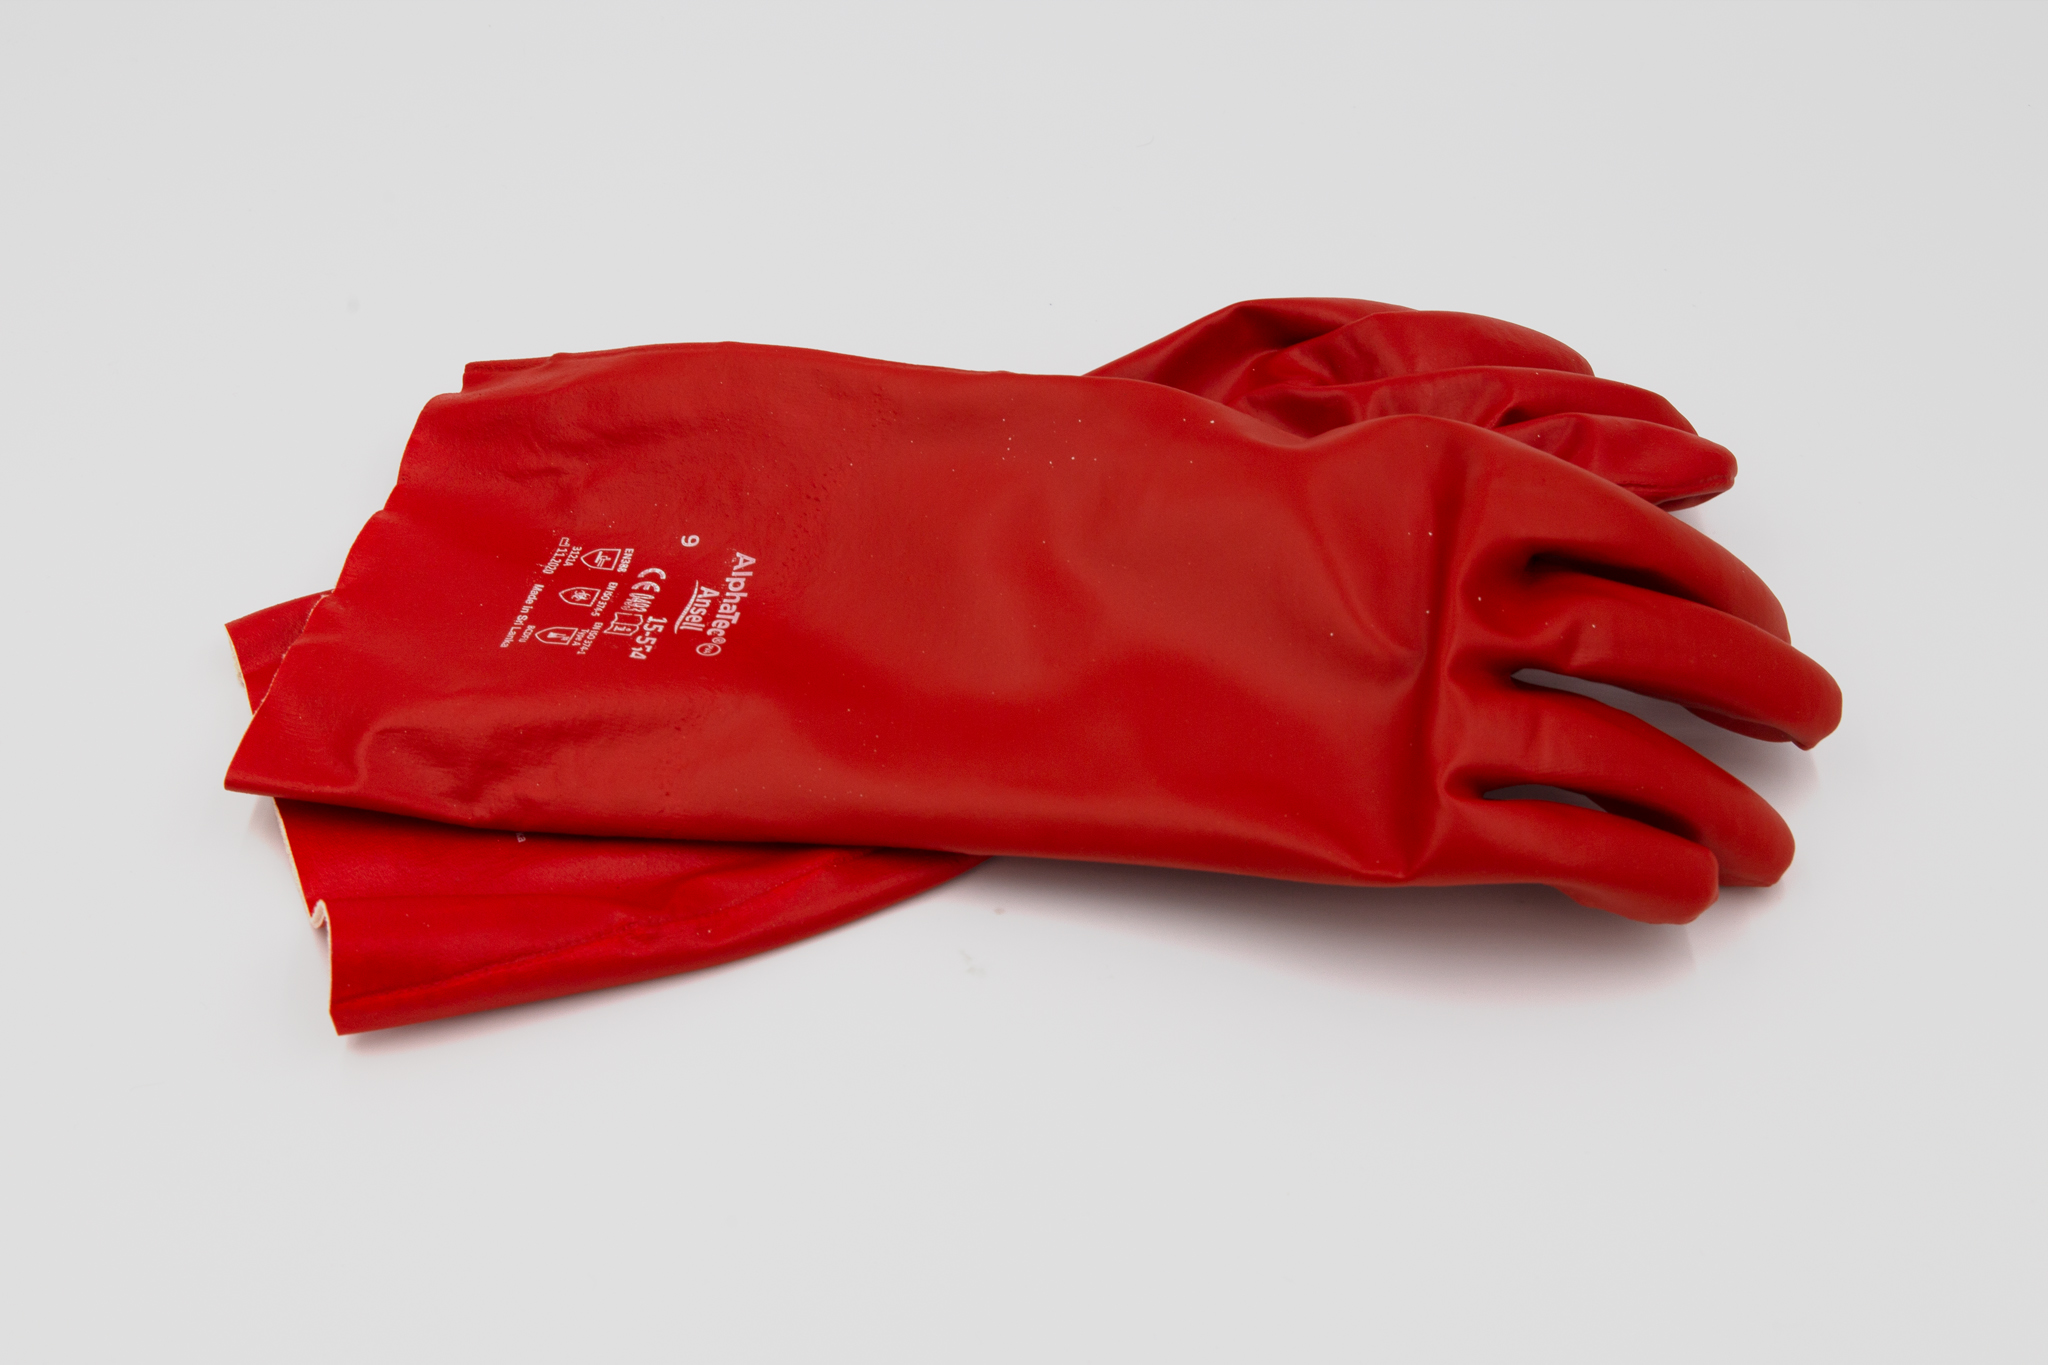 Red rubber gloves on white background